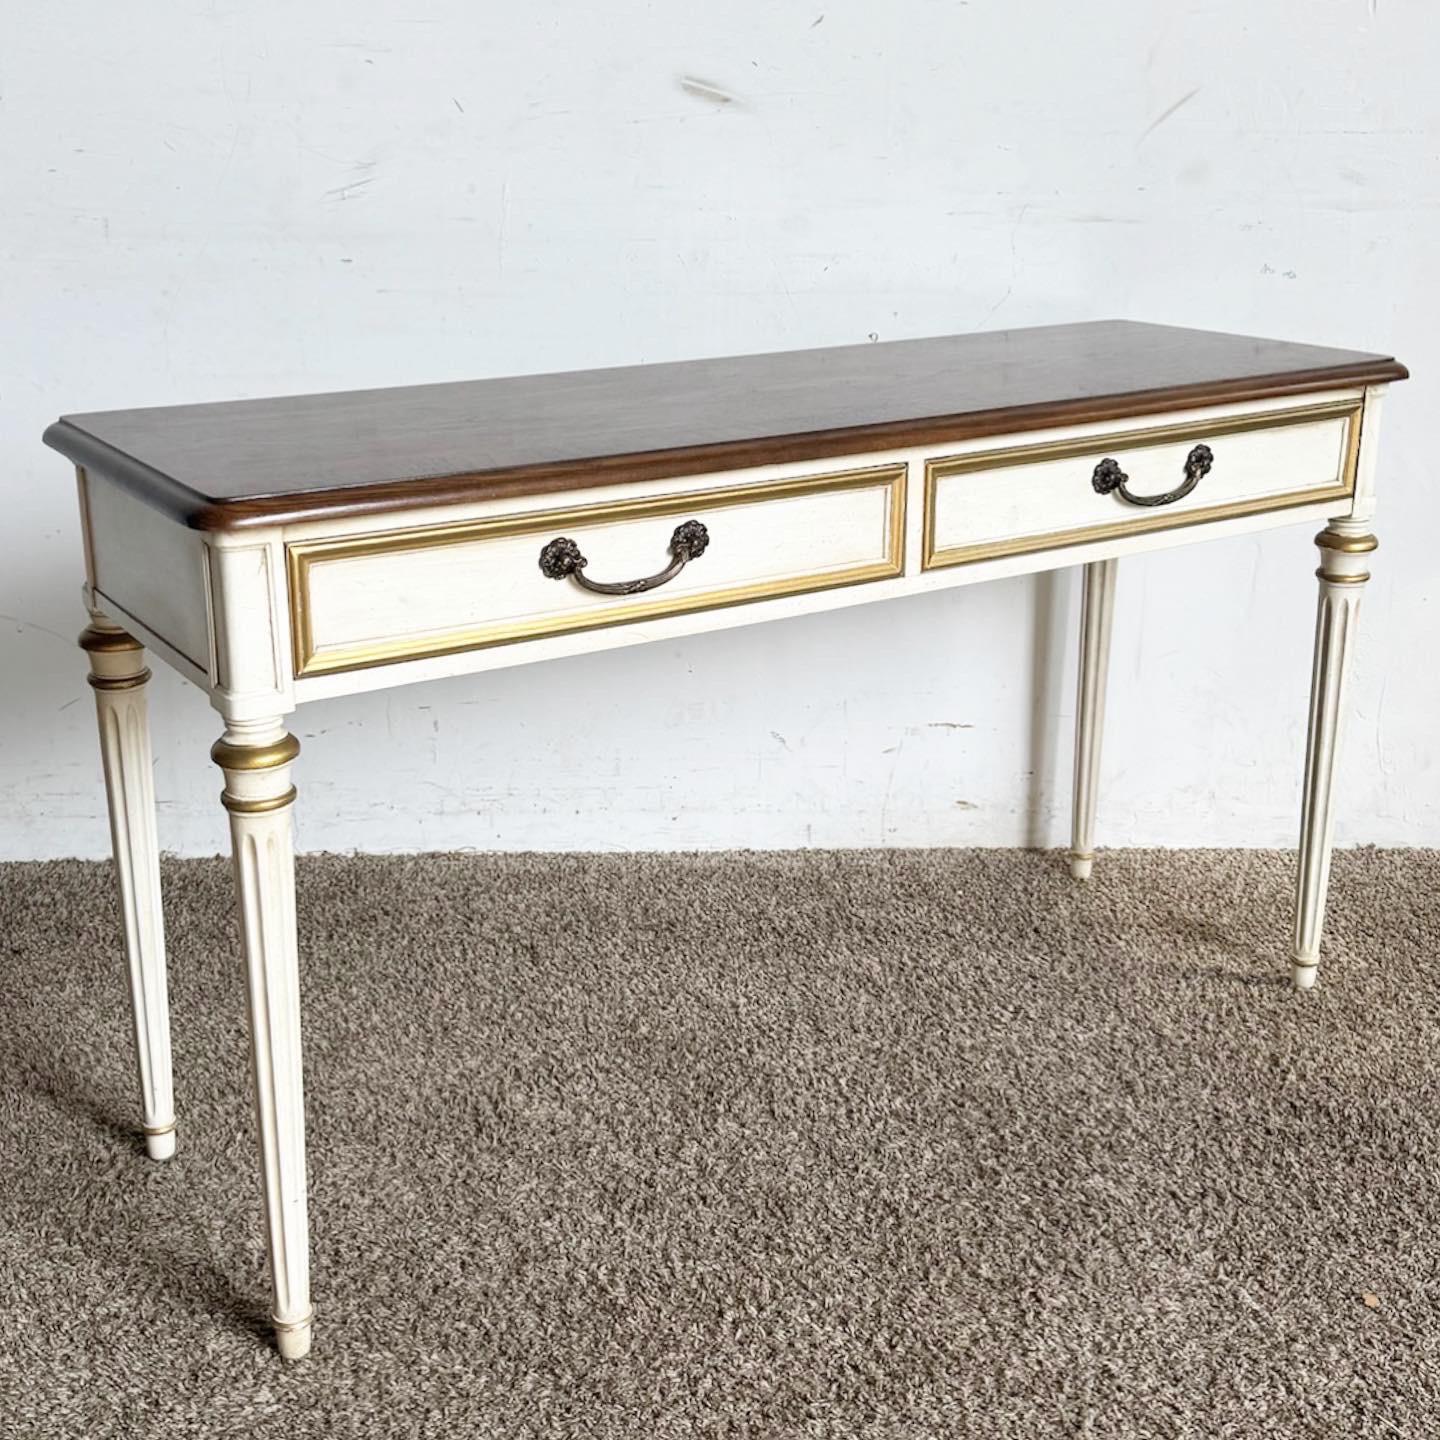 The Louis XVI Oak and Cream Console Table/Desk by Henredon marries timeless elegance with functionality. Its sturdy oak construction and cream finish reflect the classic Louis XVI style, perfect for adding a touch of regal charm to any